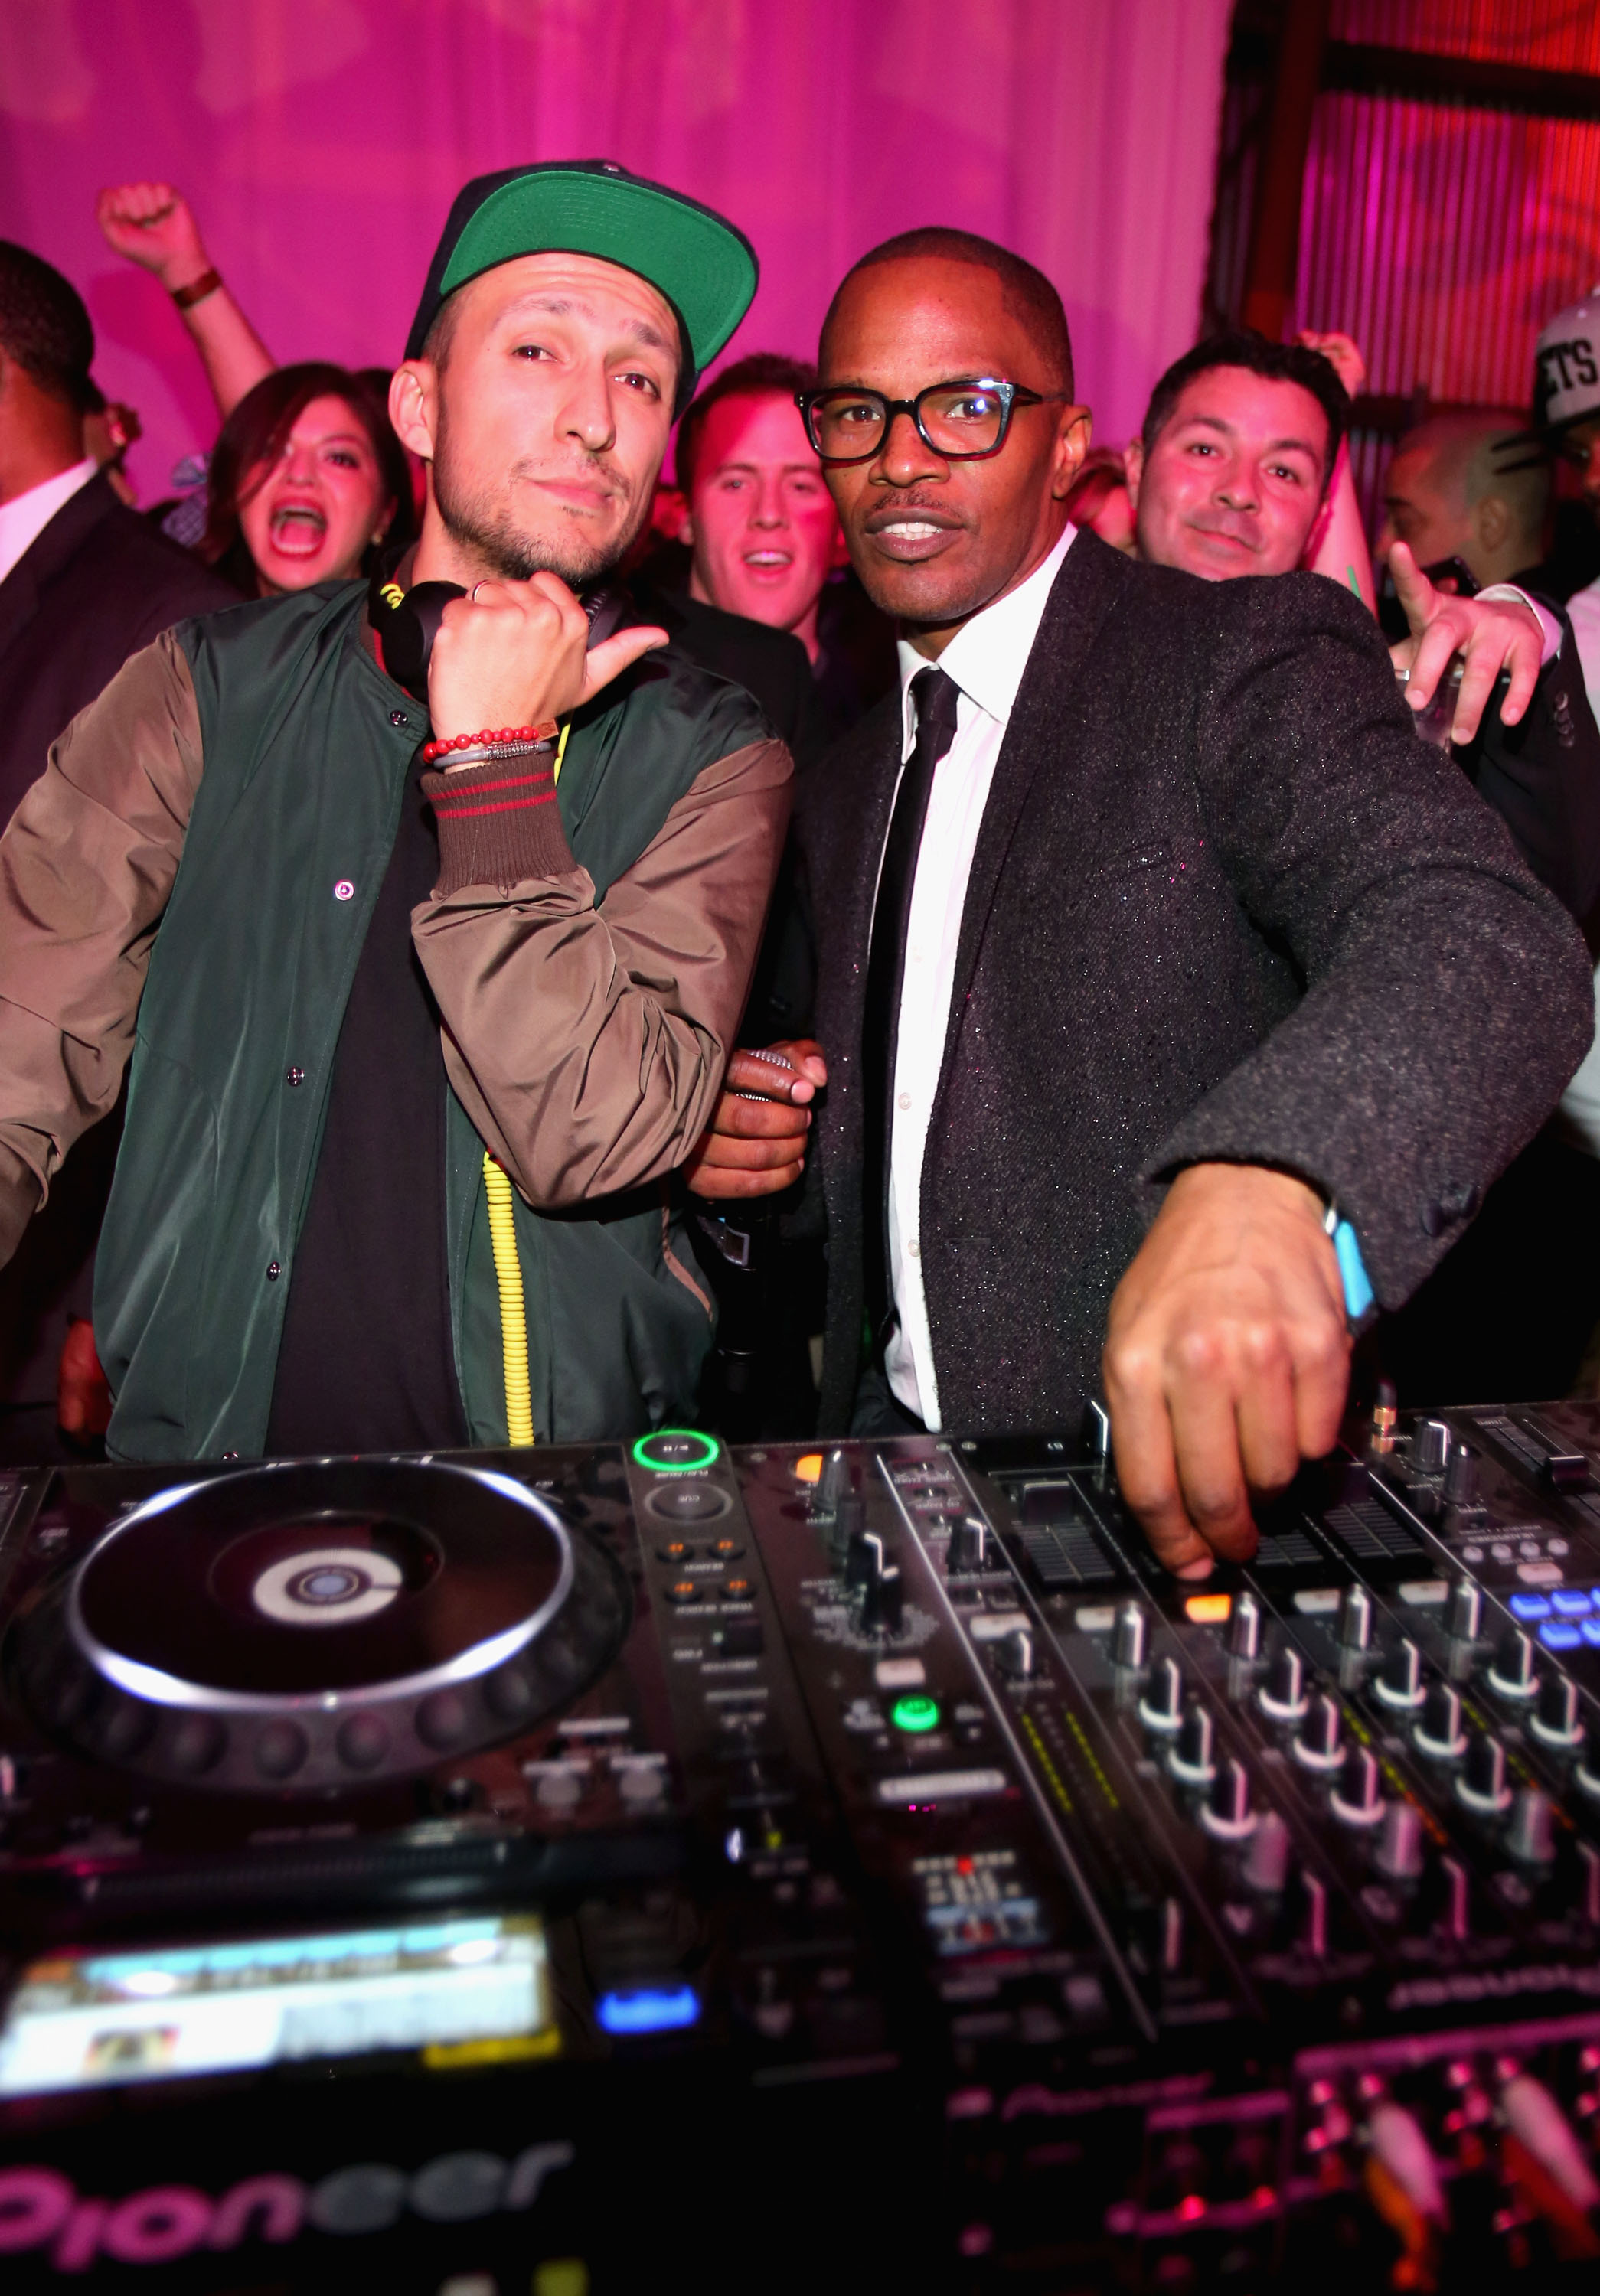 NEW ORLEANS, LA - FEBRUARY 02:   DJ Vice and actor Jamie Foxx attend The Maxim Party With "Gears of War: Judgment" For XBOX 360, FOX Sports & Starter Presented by Patron Tequila at Second Line Warehouse on February 1, 2013 in New Orleans, Louisiana.  (Photo by Tasos Katopodis/Getty Images for Maxim)